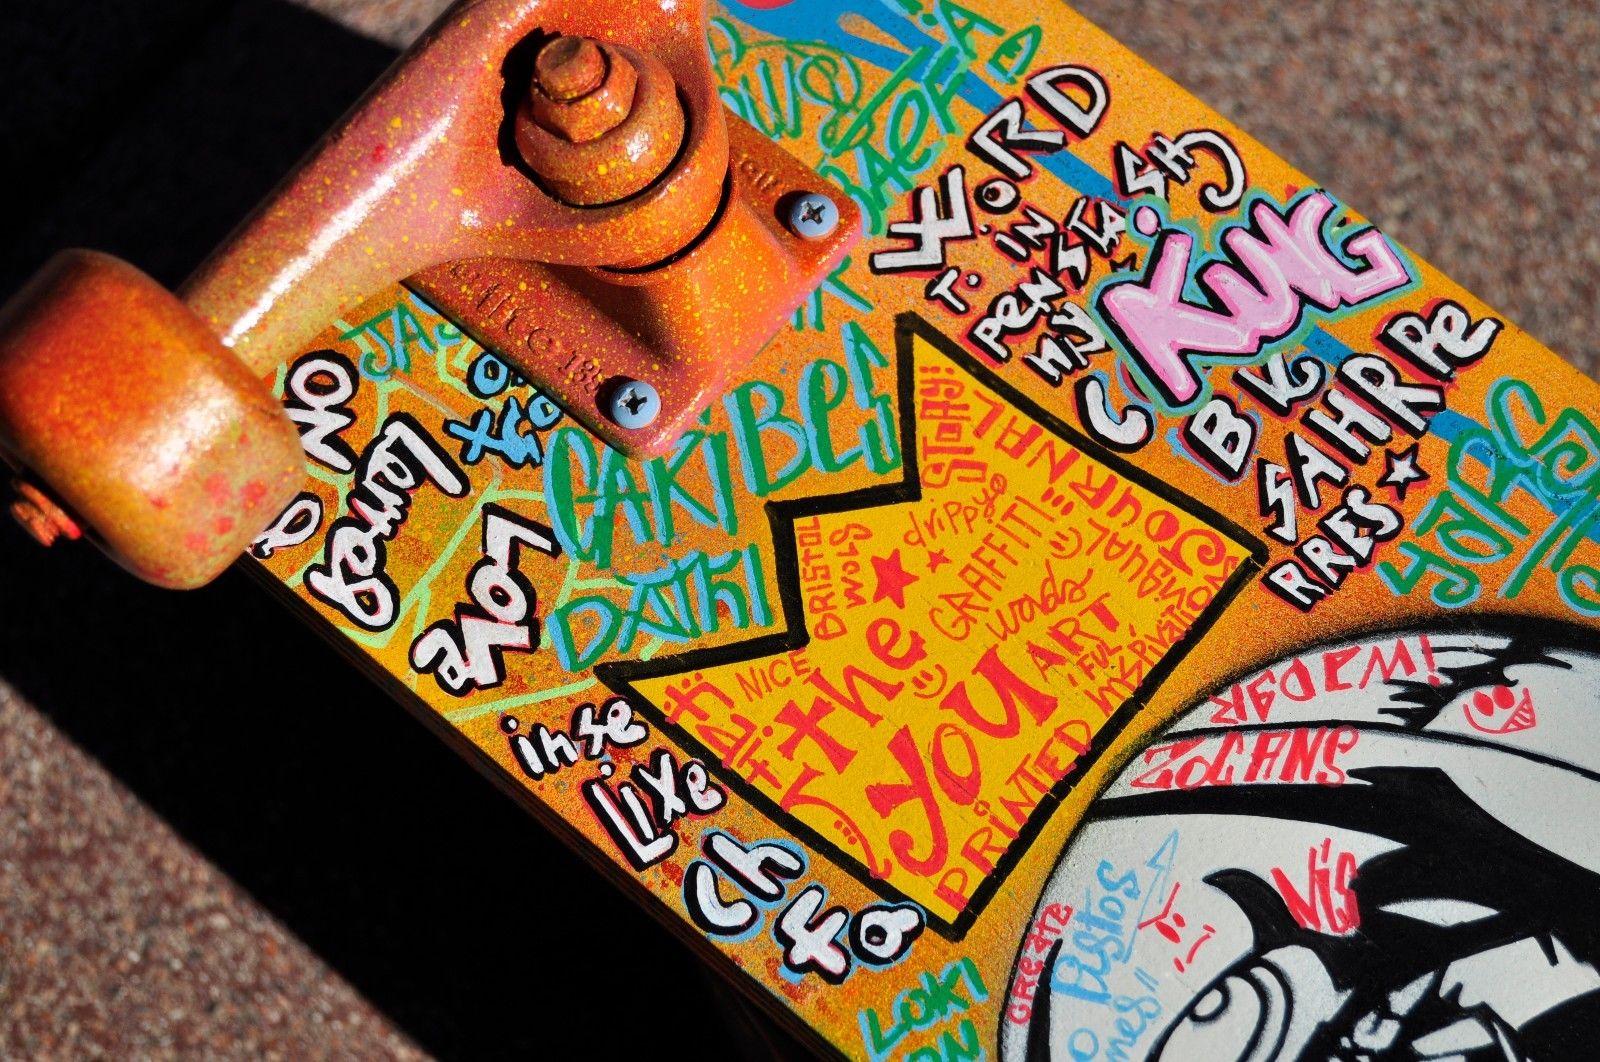 Title: BOER VADER
Technique: Graffiti 
Material: Acrylic on wood laminate, and skate axle
Size: 20 cm x 39 cm  
Philosophy of the artist: 
Graffiti from the walls of Barcelona